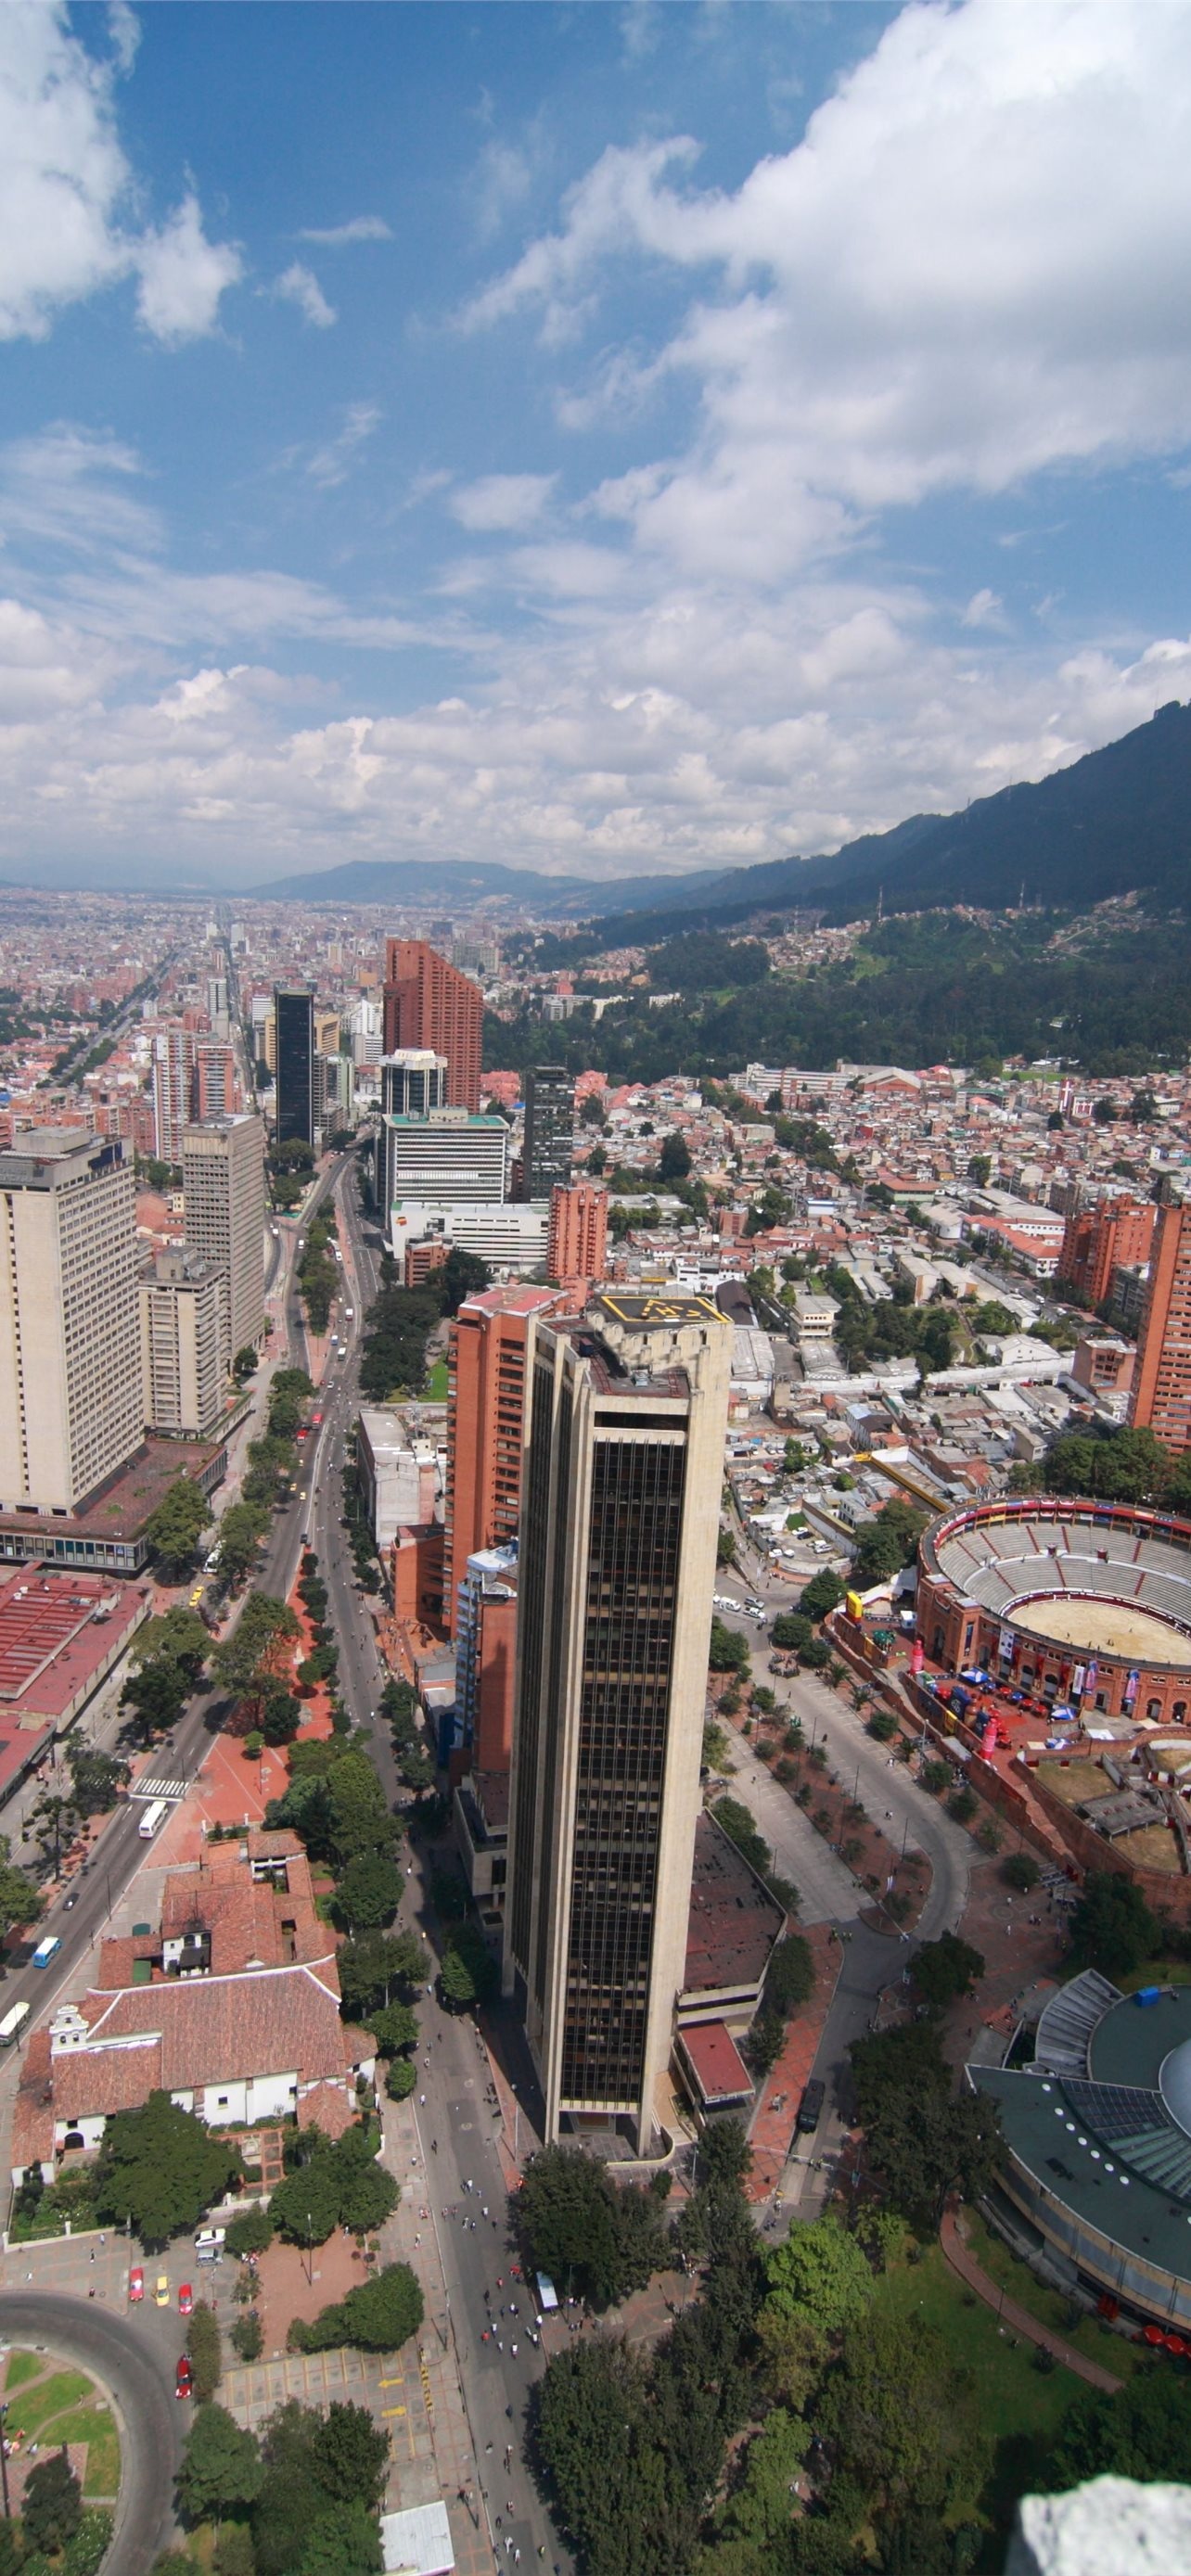 Bogota, Colombia, Latest iPhone HD wallpapers, 1290x2780 HD Handy